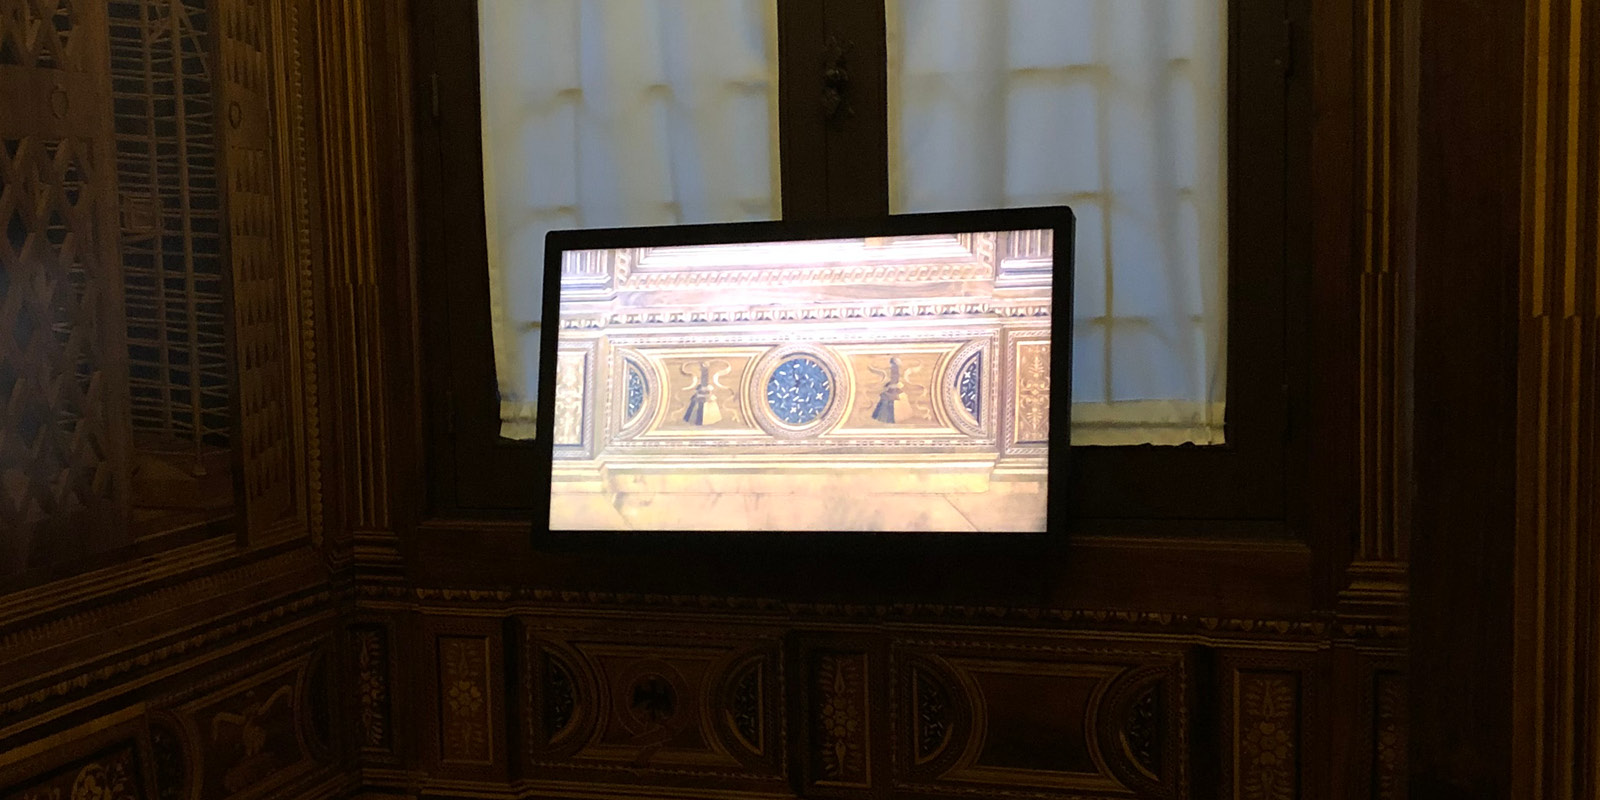 Touchwindow - Technology brings history back to life